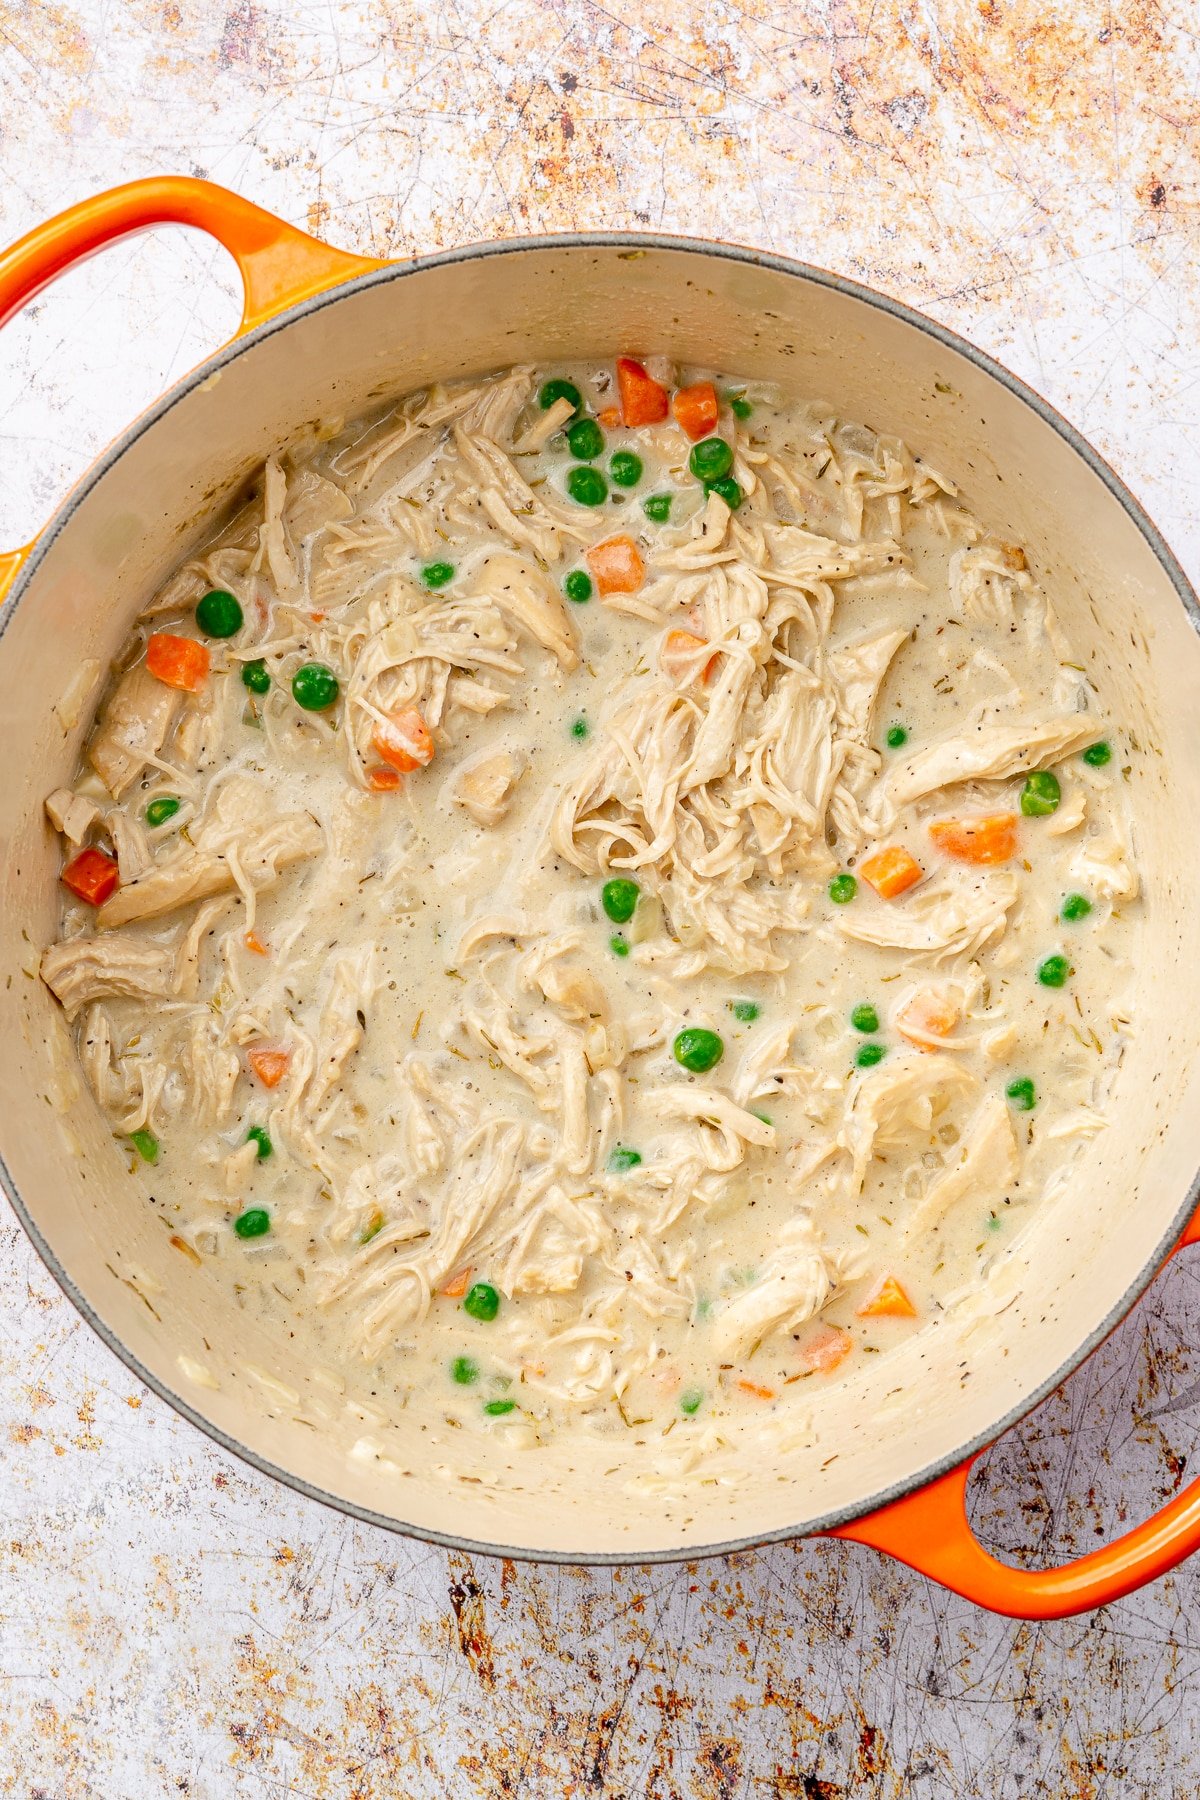 A creamy mixture with shredded chicken, diced carrots, and peas sit in an enameled pot.